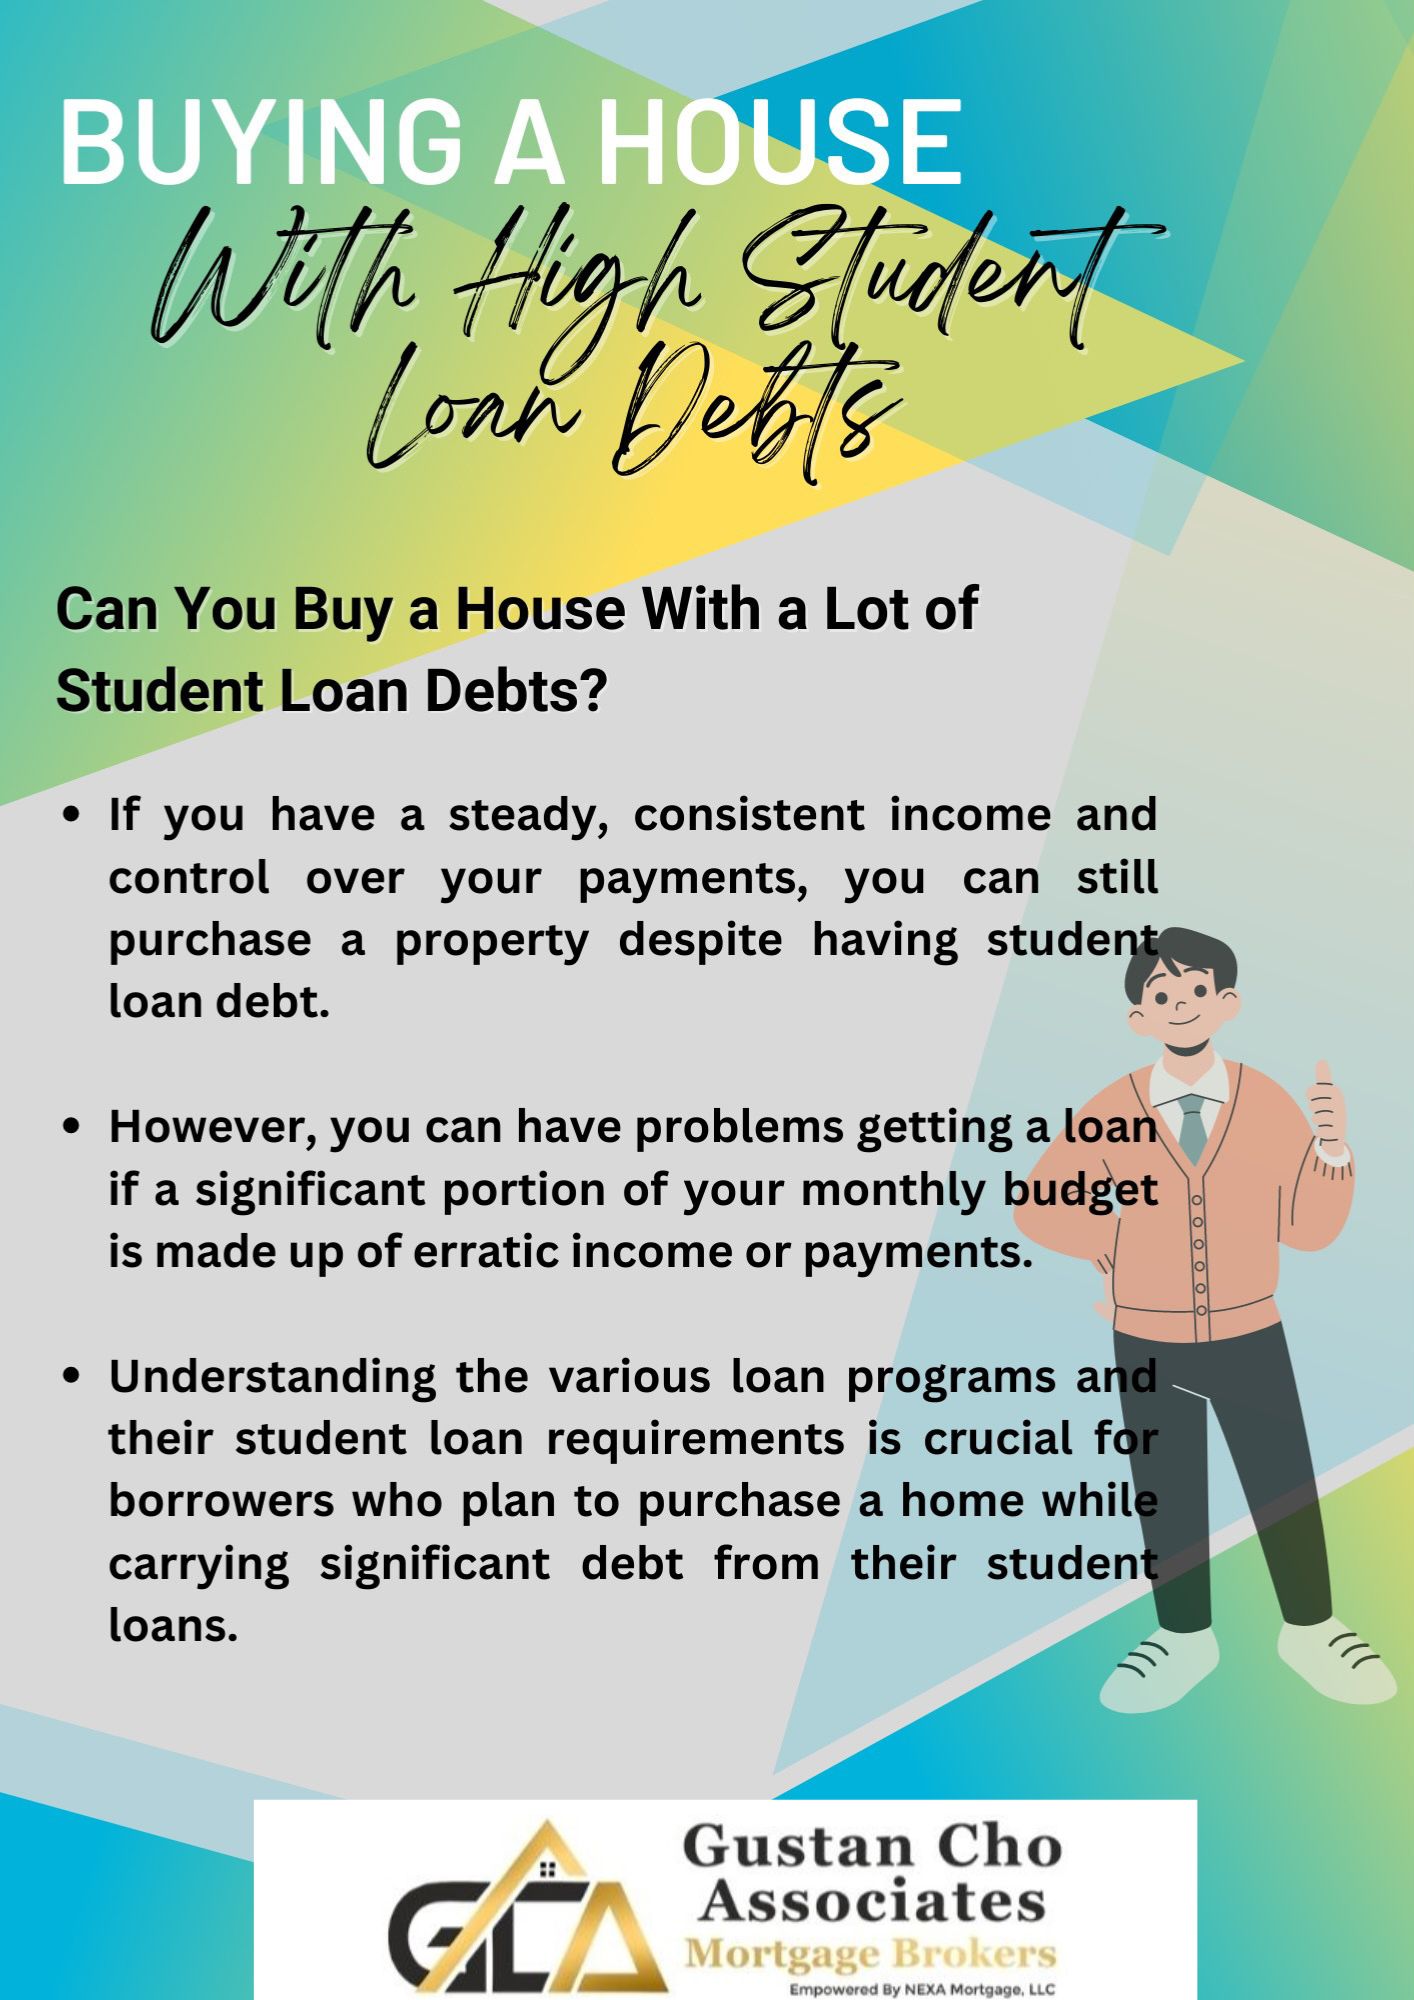 Can You Buy a House With a Lot of Student Loan Debts